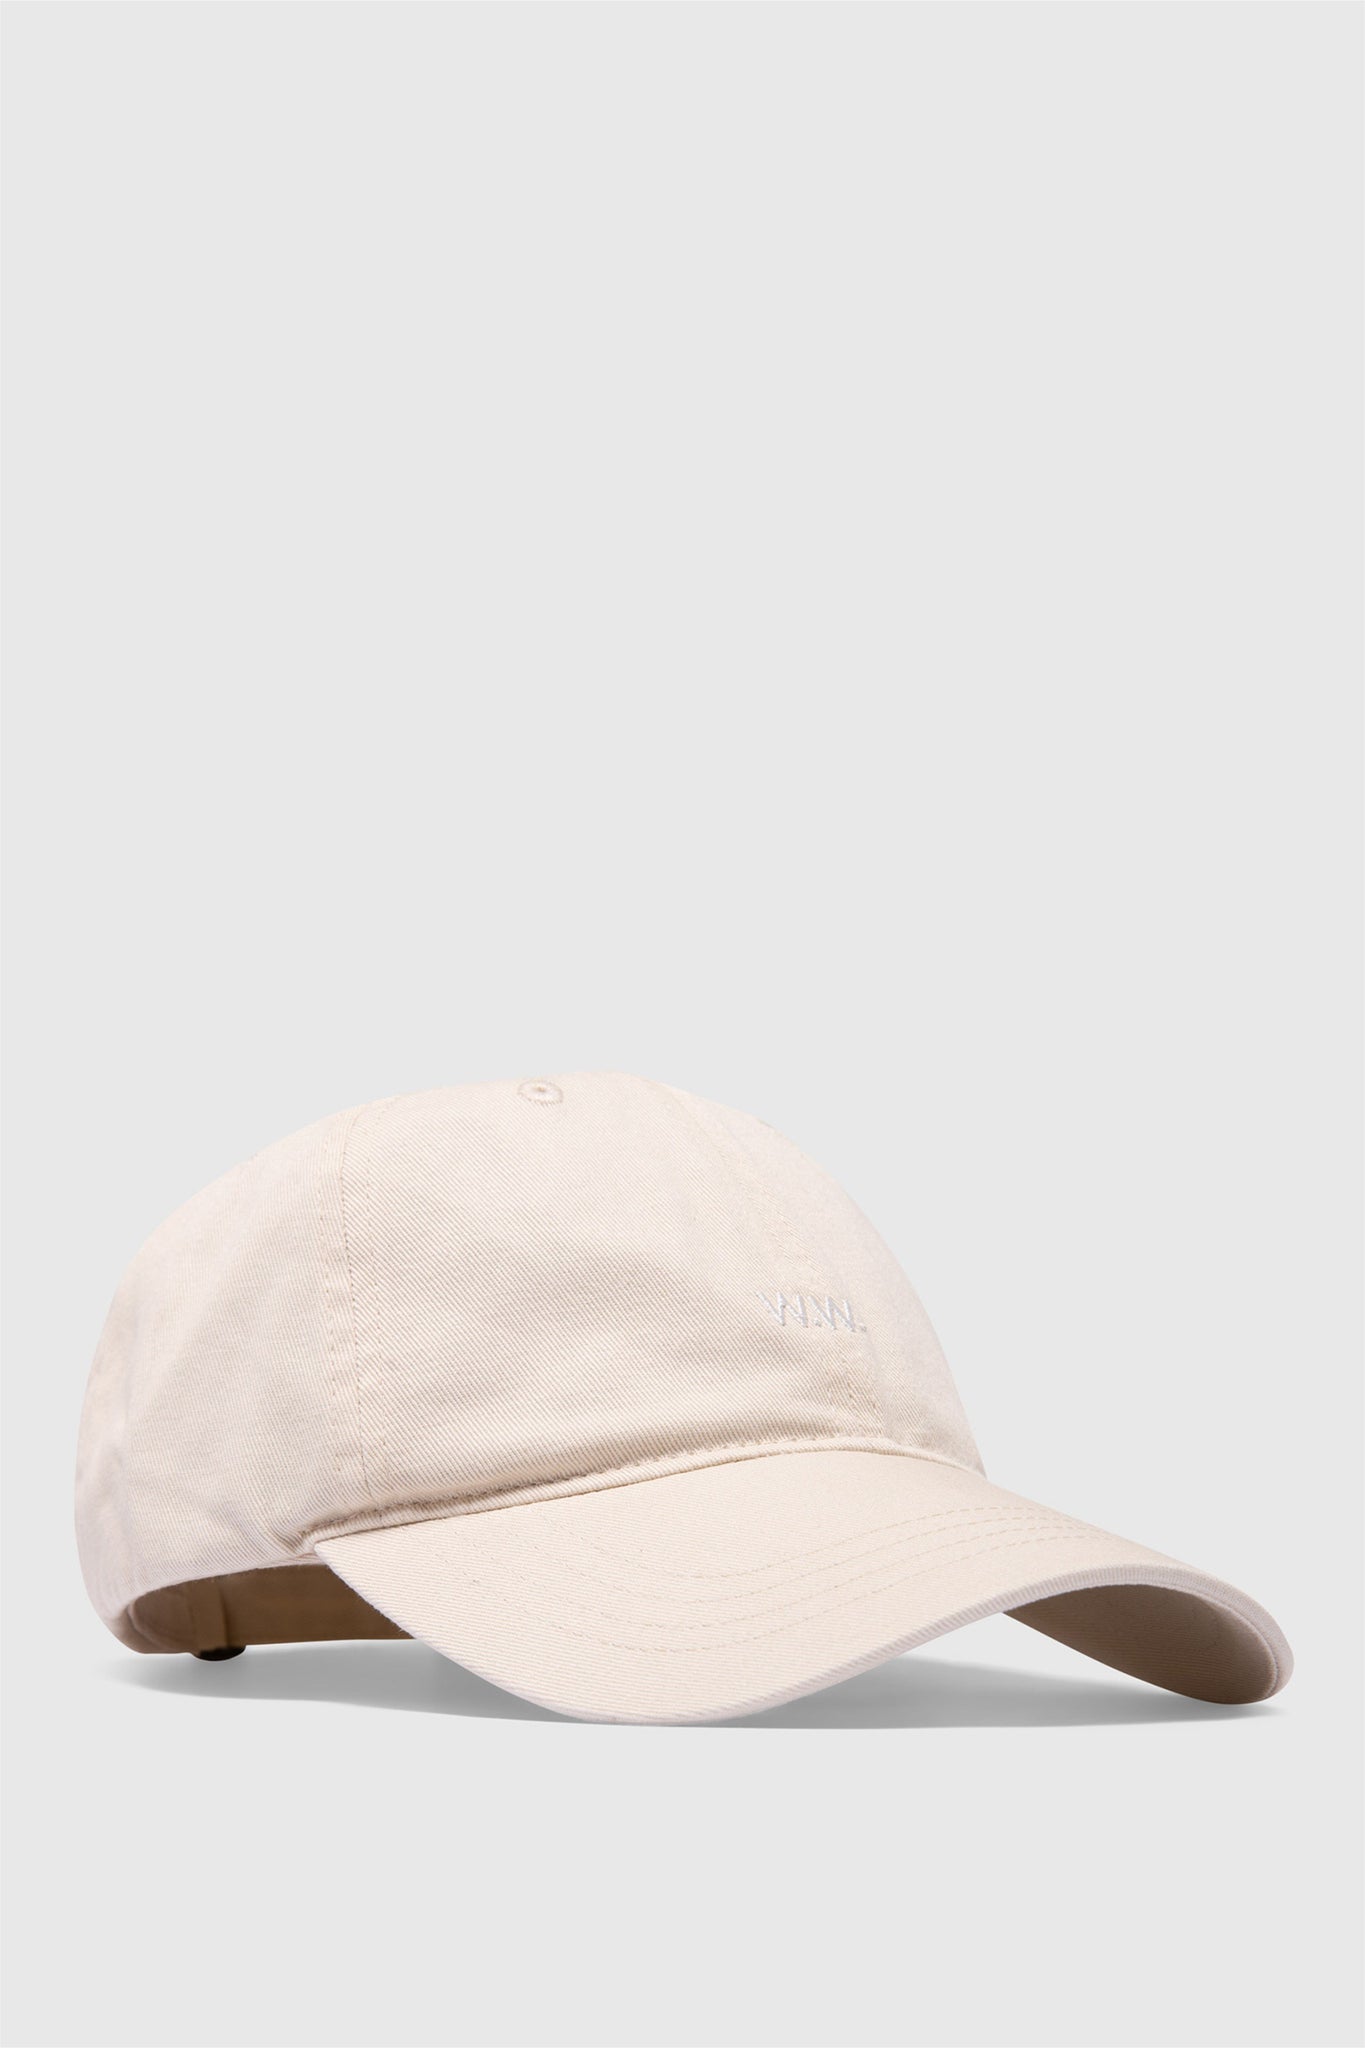 LOW PROFILE CAP IN OFF WHITE BY WOOD WOOD